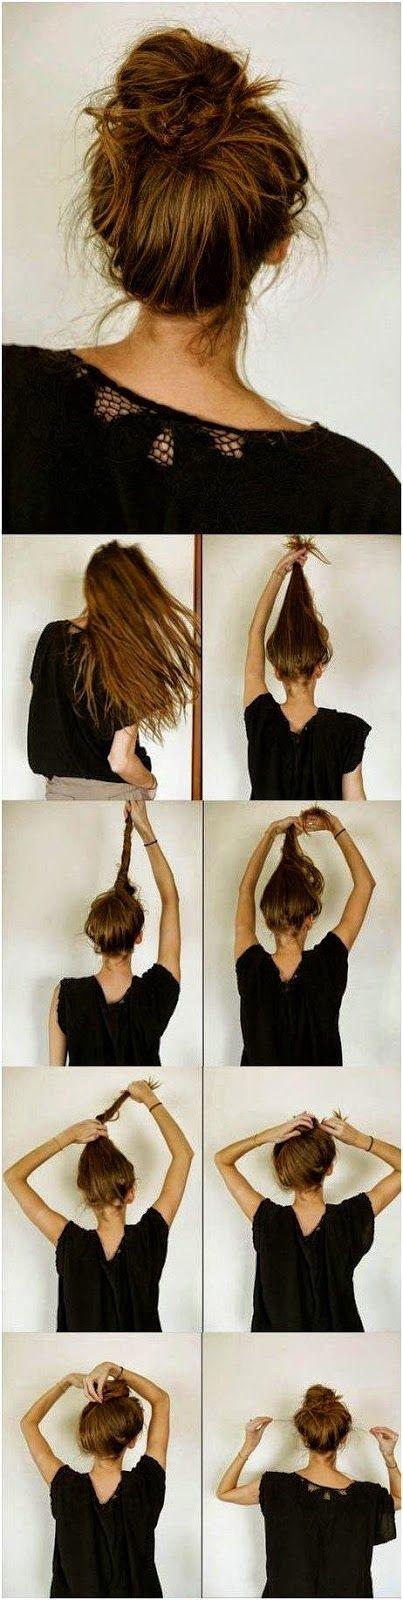 Pretty easy to do hairstyles pretty-easy-to-do-hairstyles-66_15